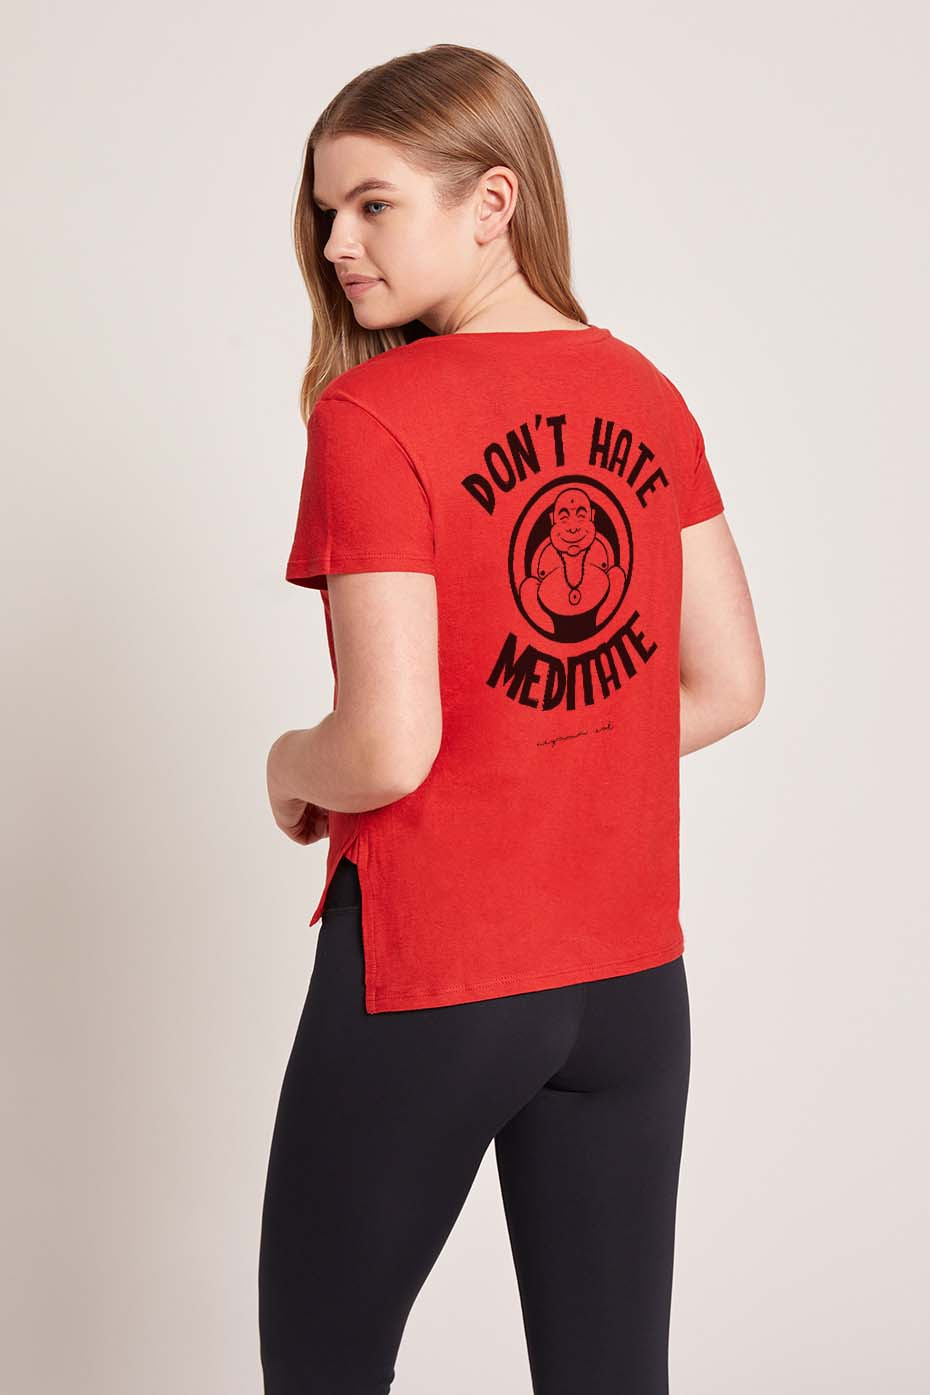 Don't Hate Meditate Graphic Tee - Red